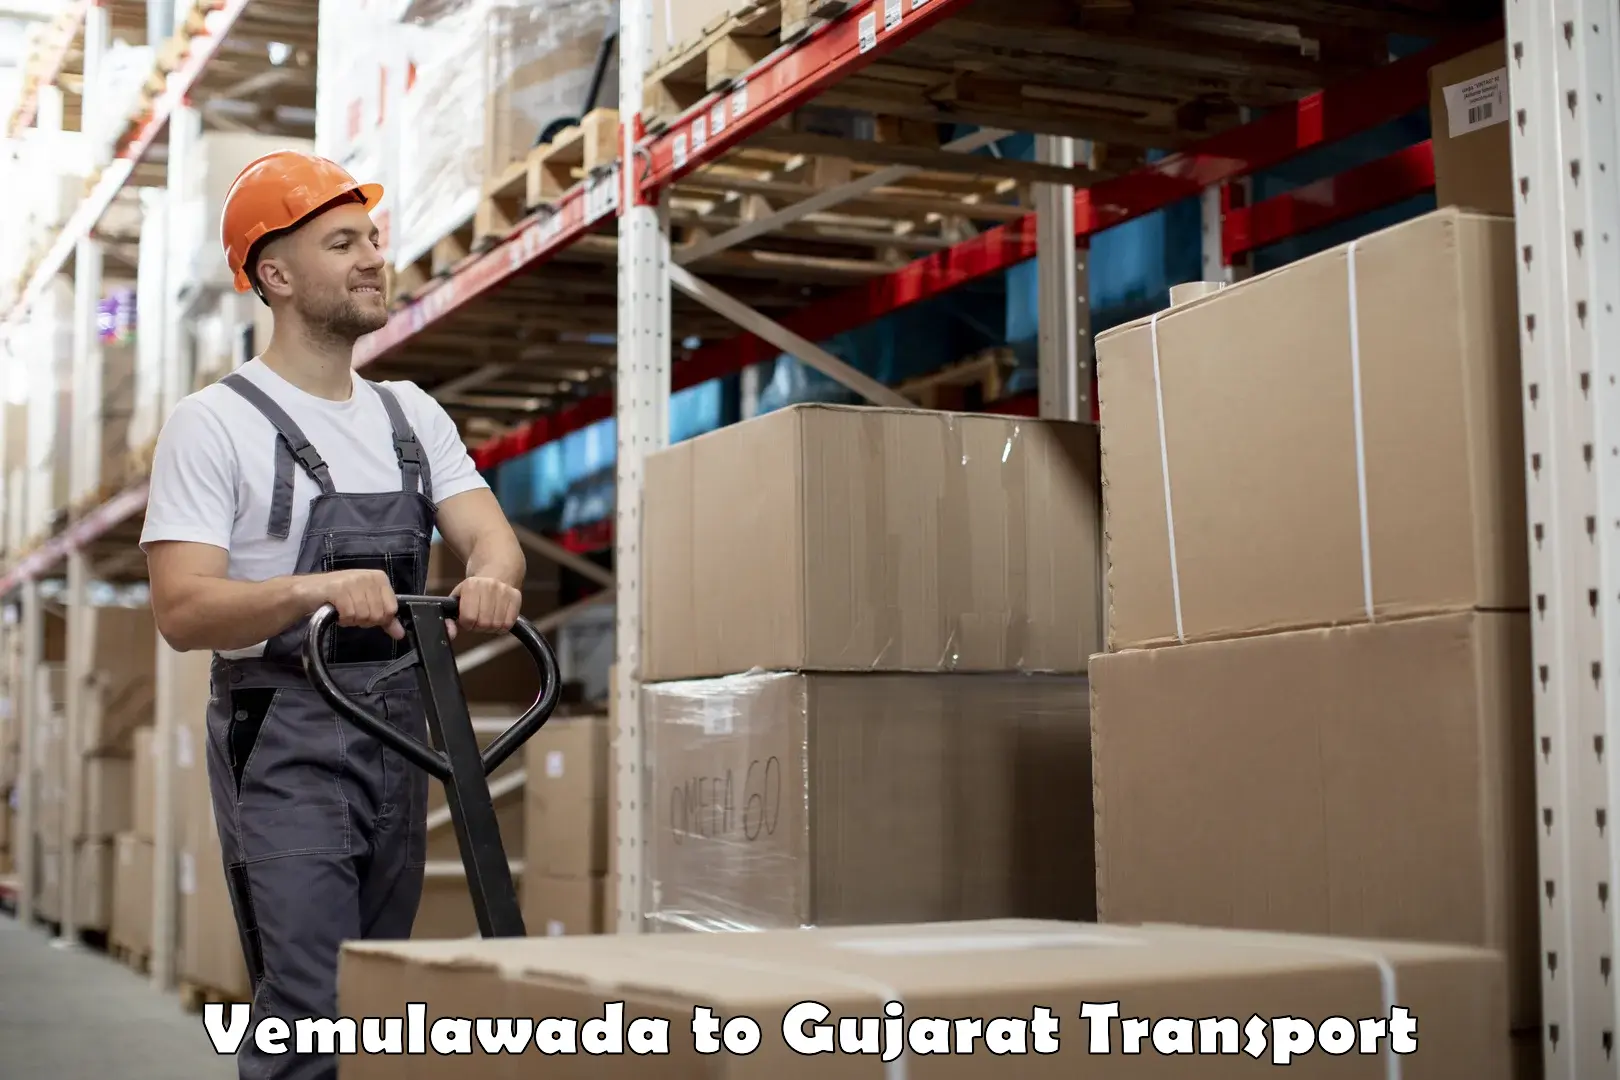 Commercial transport service Vemulawada to Ahmedabad